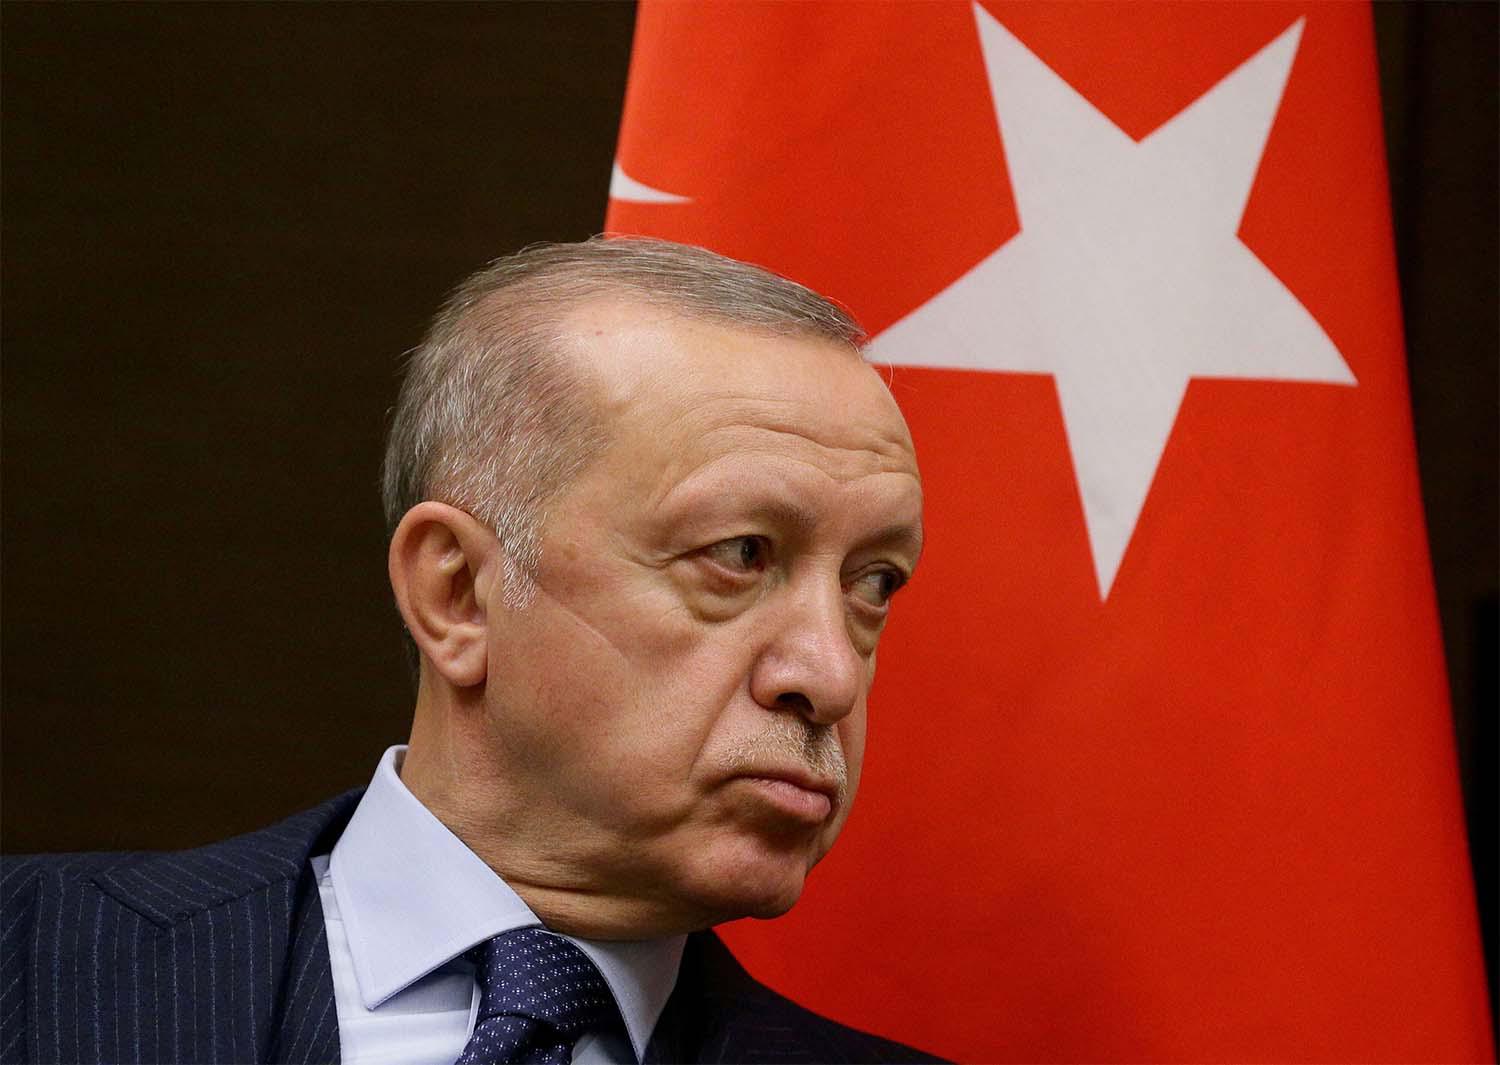 Erdogan said the ambassadors in question would not release "bandits, murderers and terrorists" in their own countries